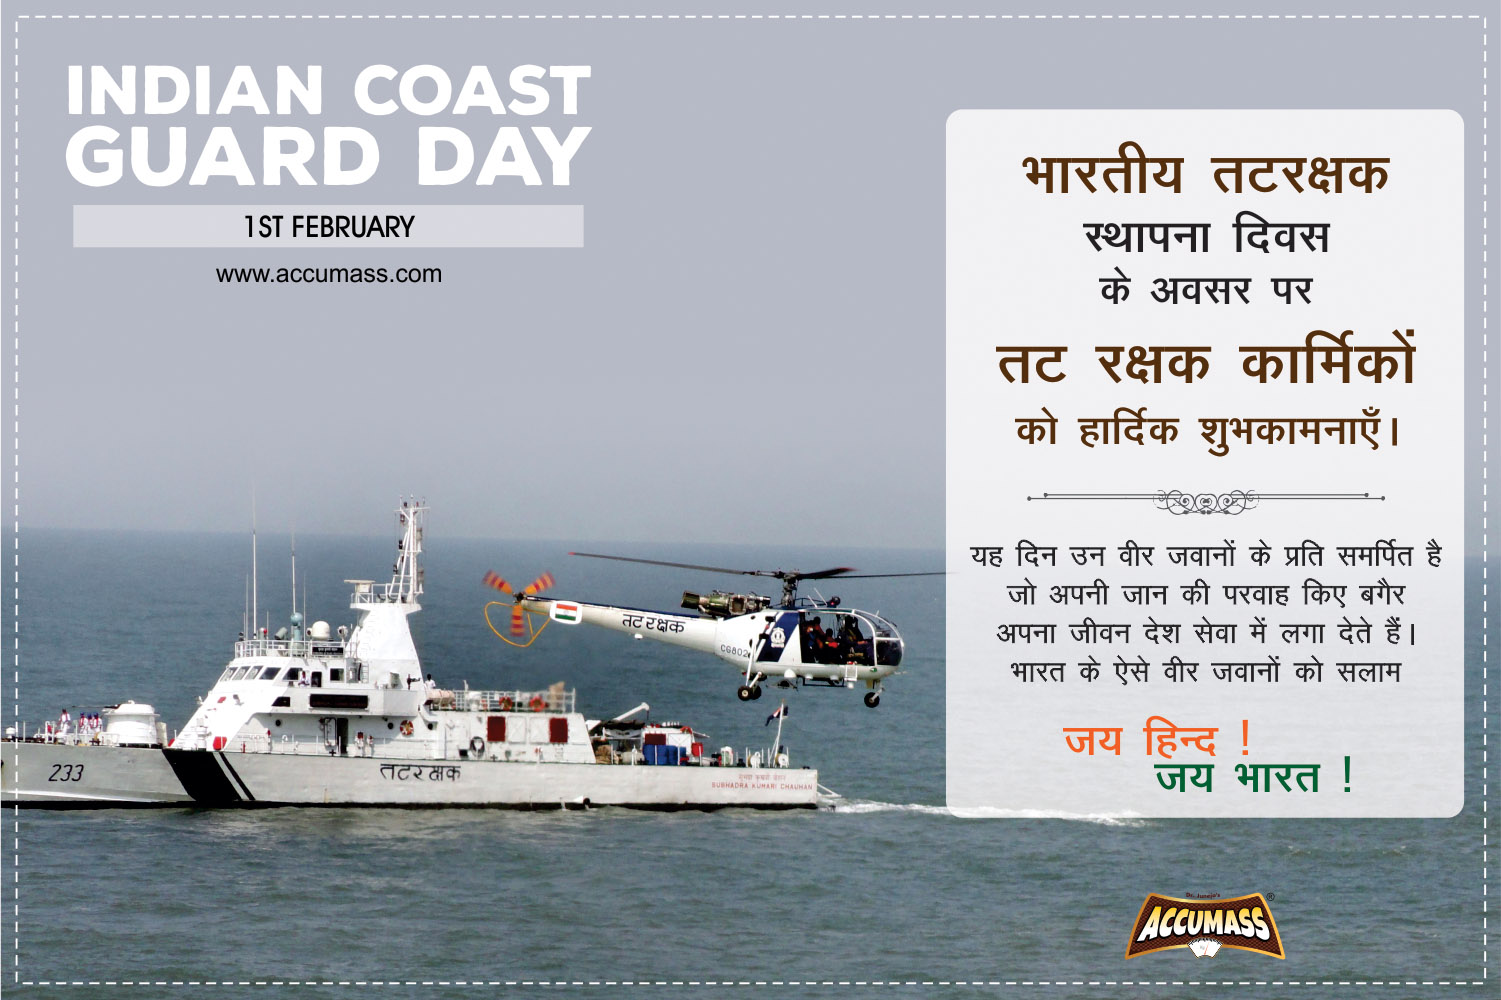 Indian Coast Guard Day, February Special, National Days, Rememberable February, Whats Special In February 2018, Best Of February 2018, Special Quotes, Status, Feb 2018 Special, Accumass